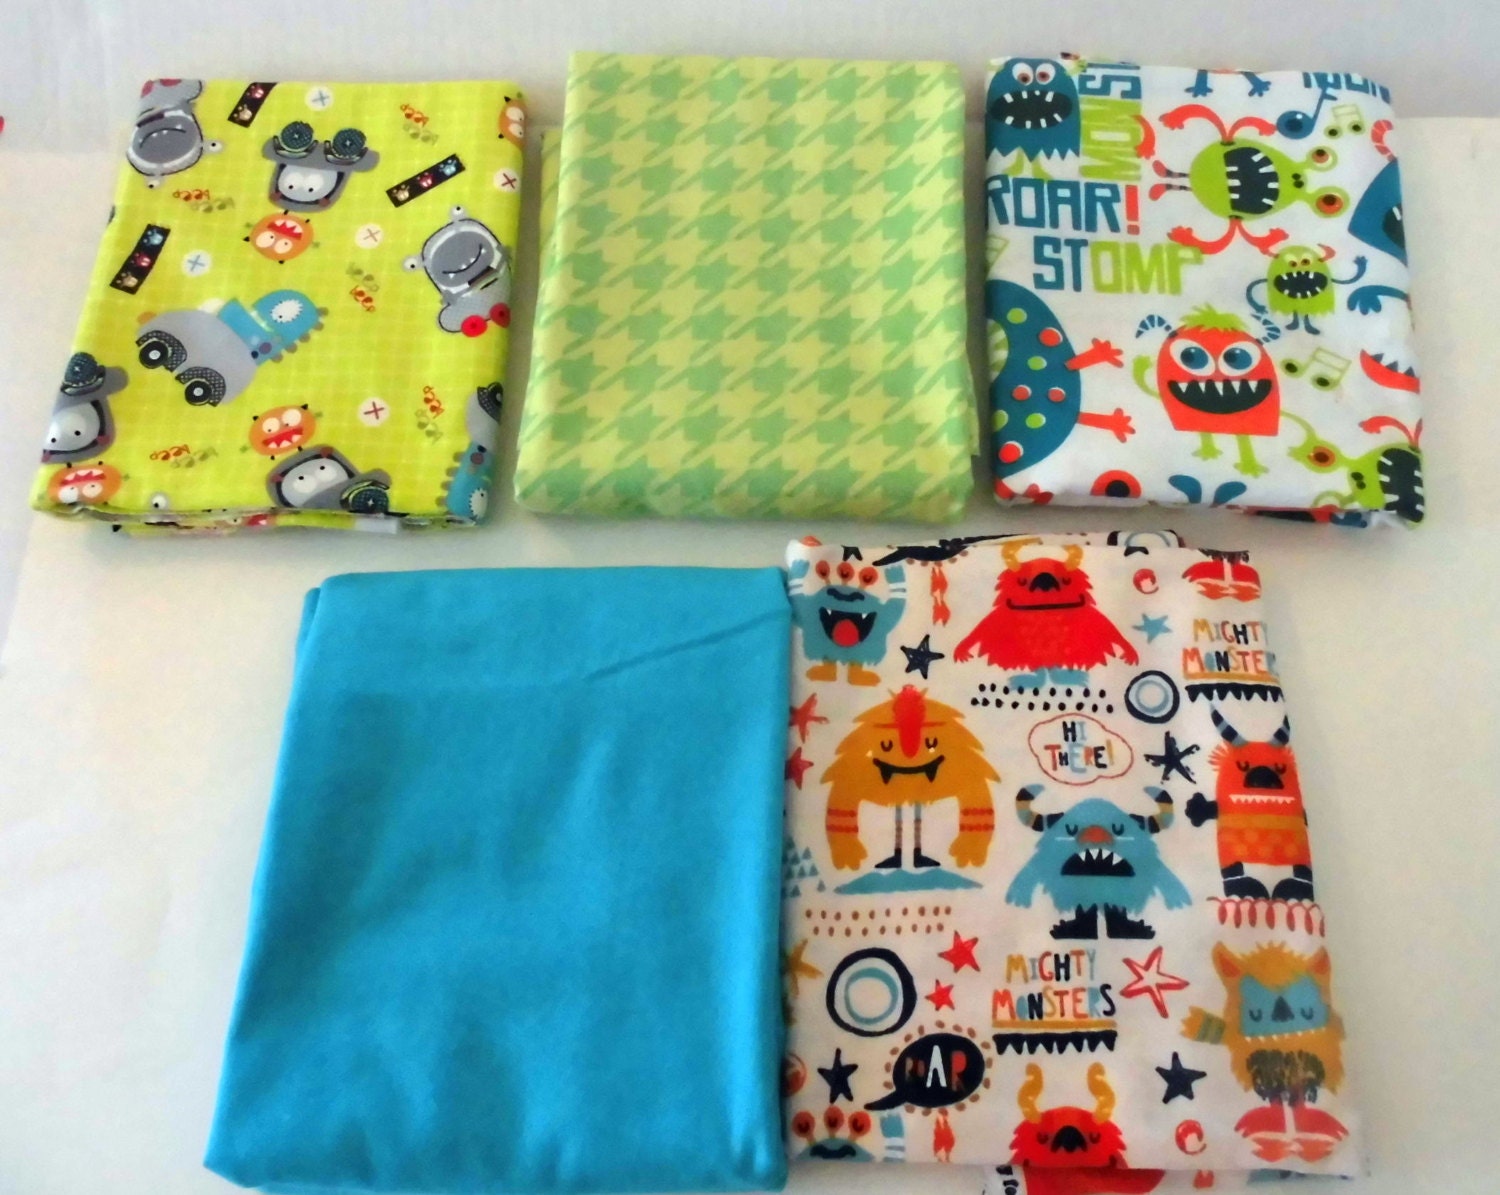 Fabric Sewing Monsters Flannel Fabric Bundle Save by flyingdollar